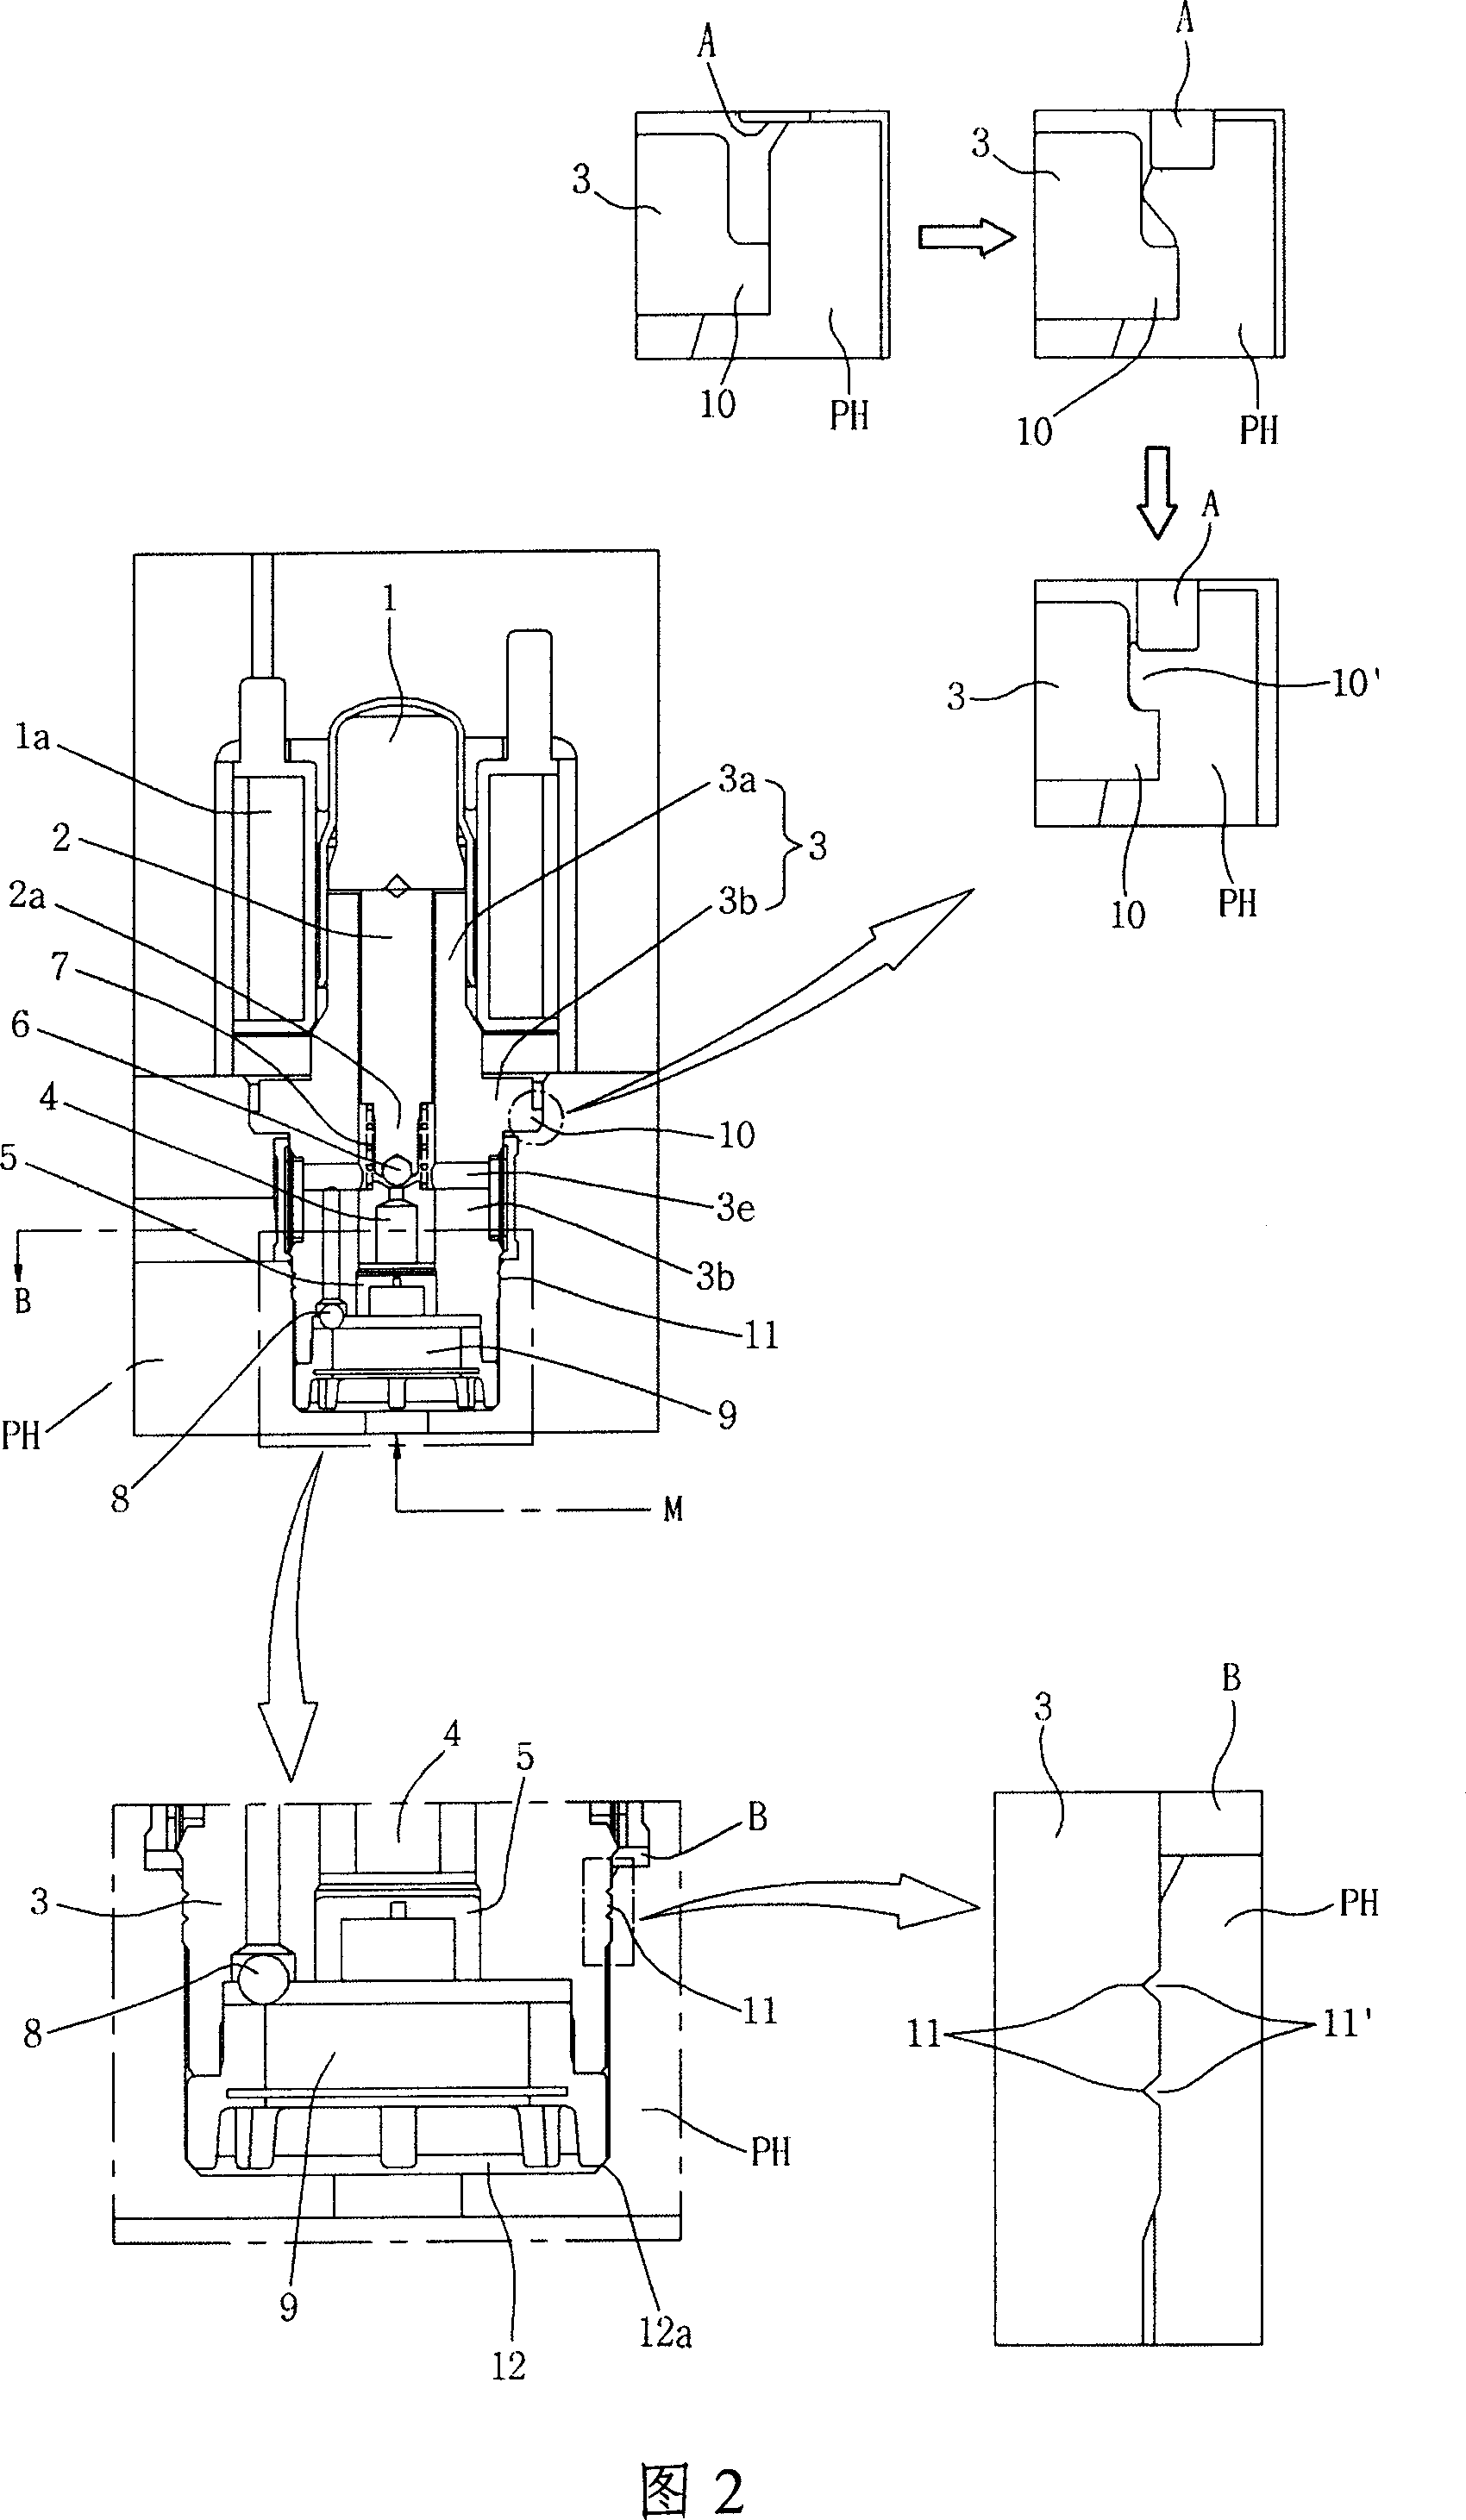 Solenoid valve for controlling the flow of brake oil